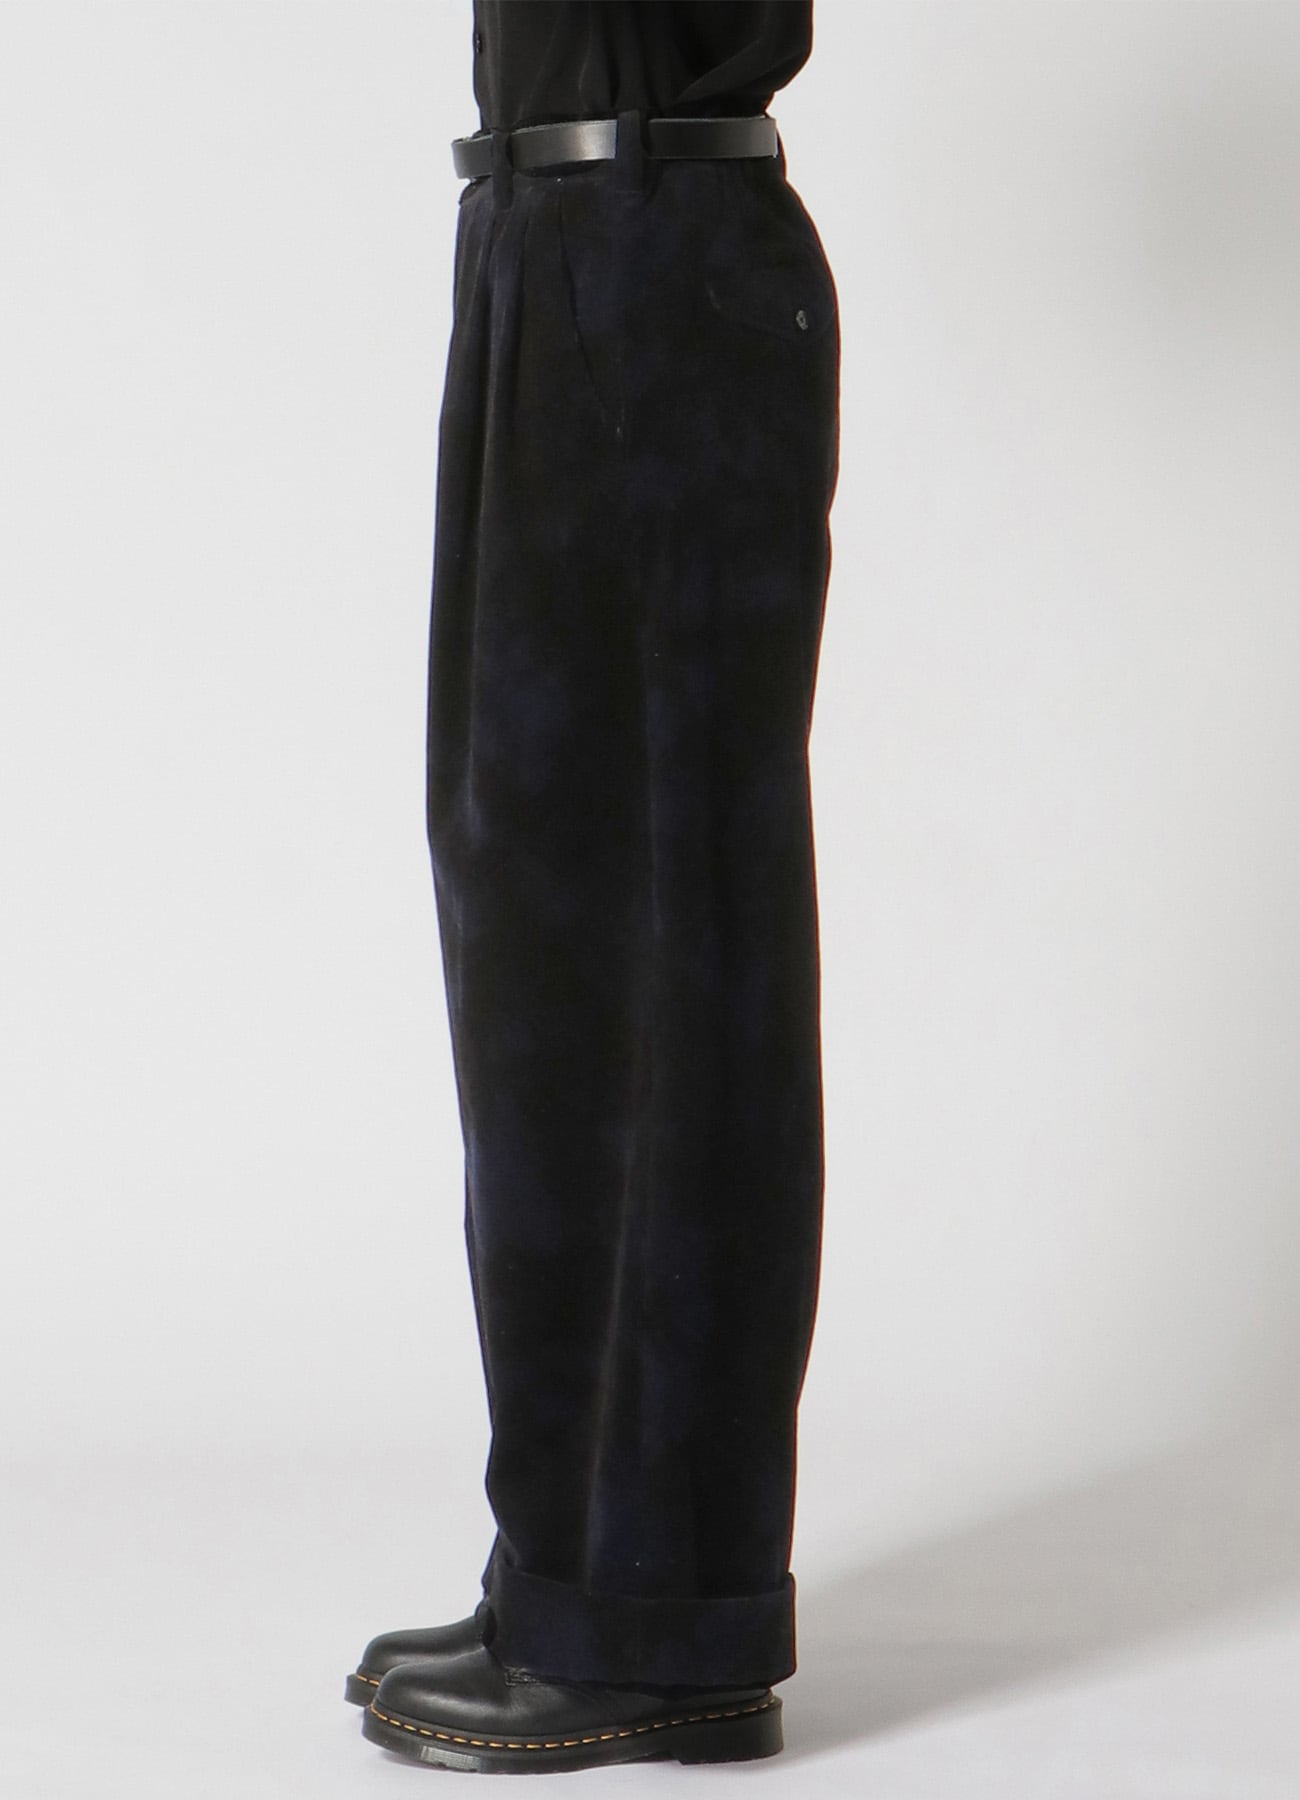 UNEVEN DYED CORDUROY 2 TUCK WIDE CUFFED PANTS